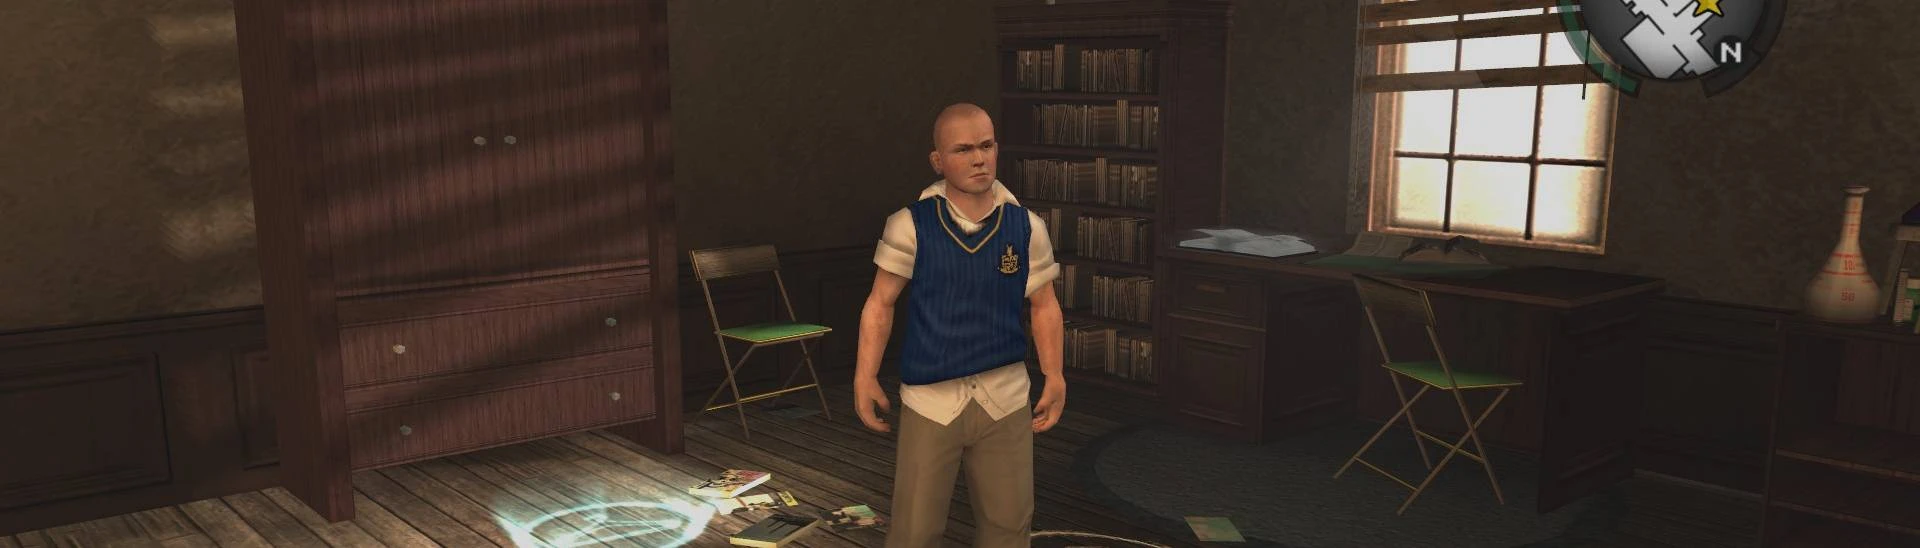  Bully: Scholarship Edition : Video Games